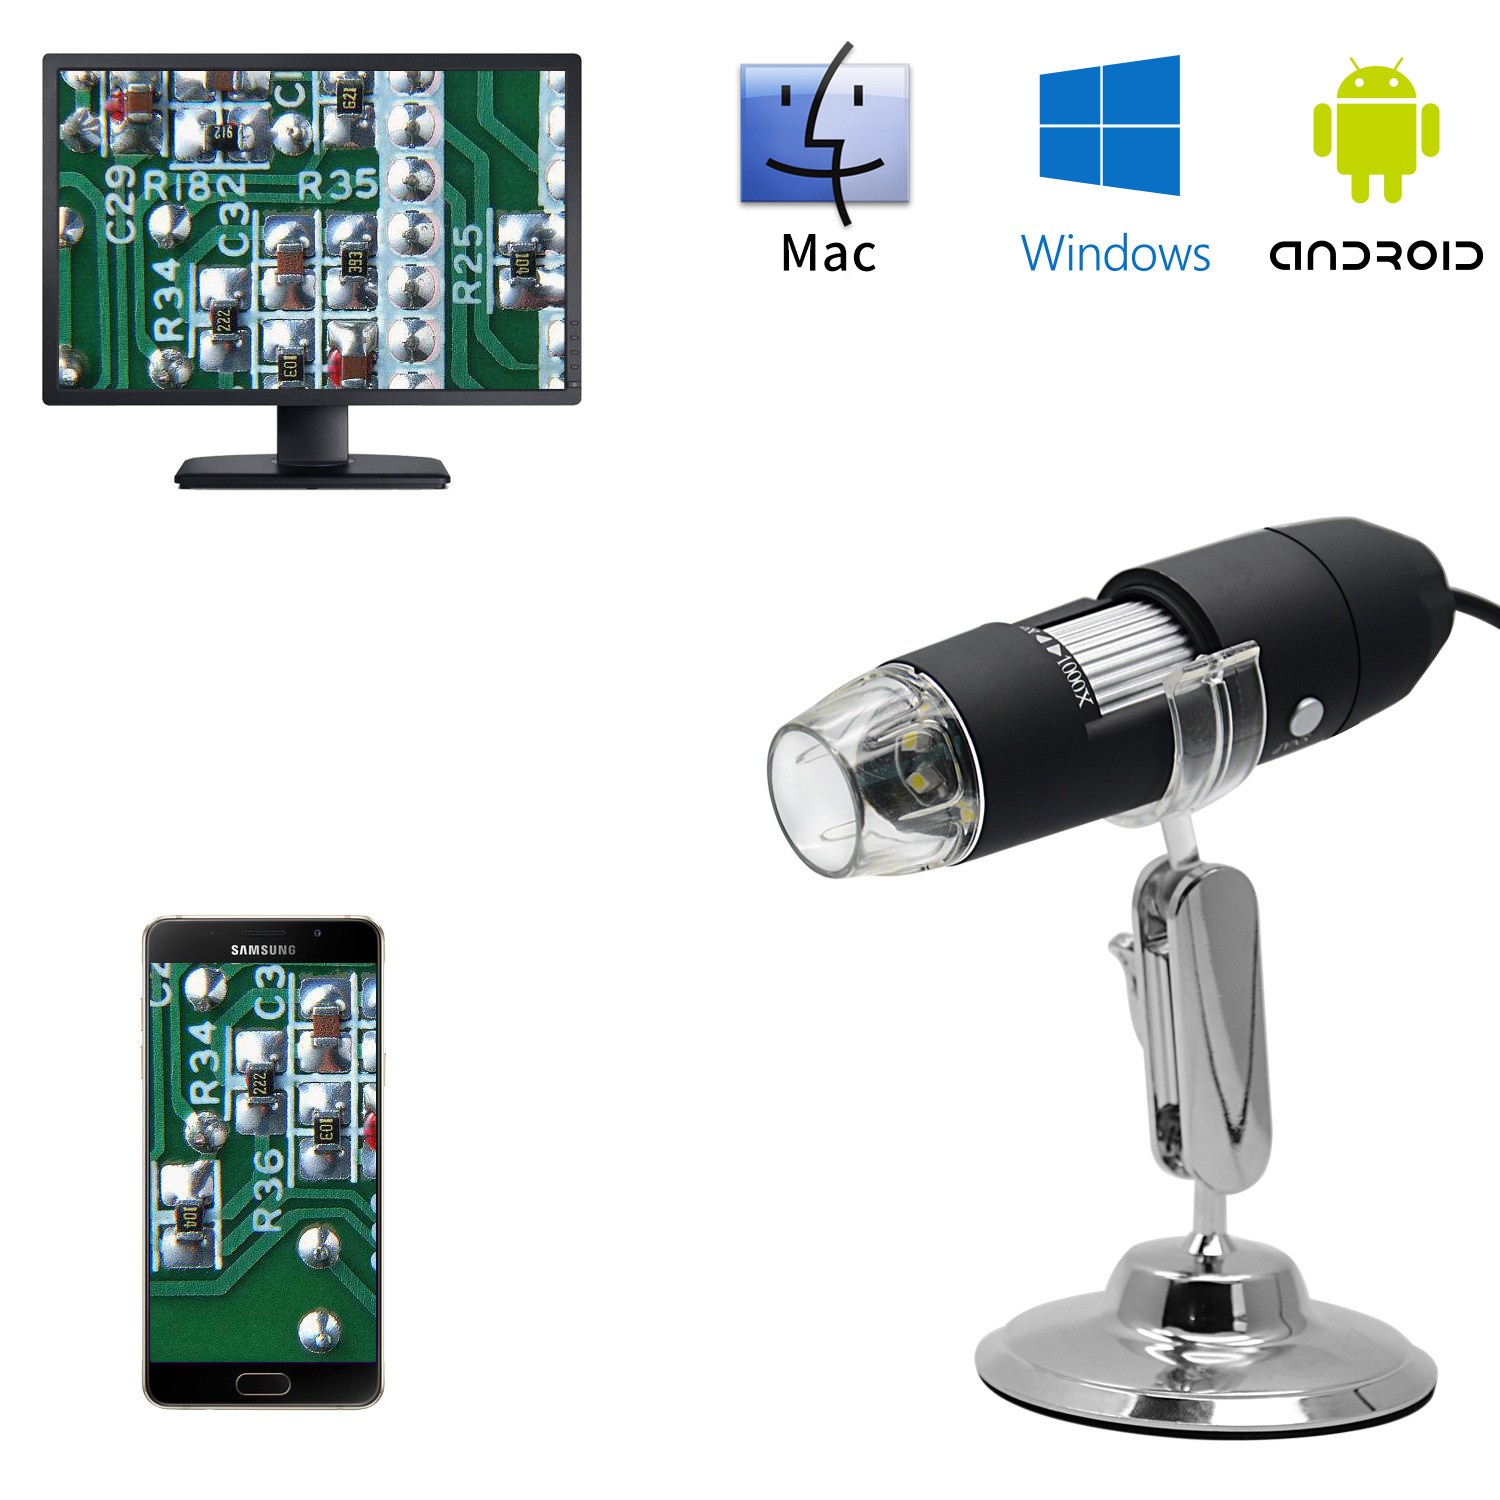 Buying Guide for Best Digital Microscope